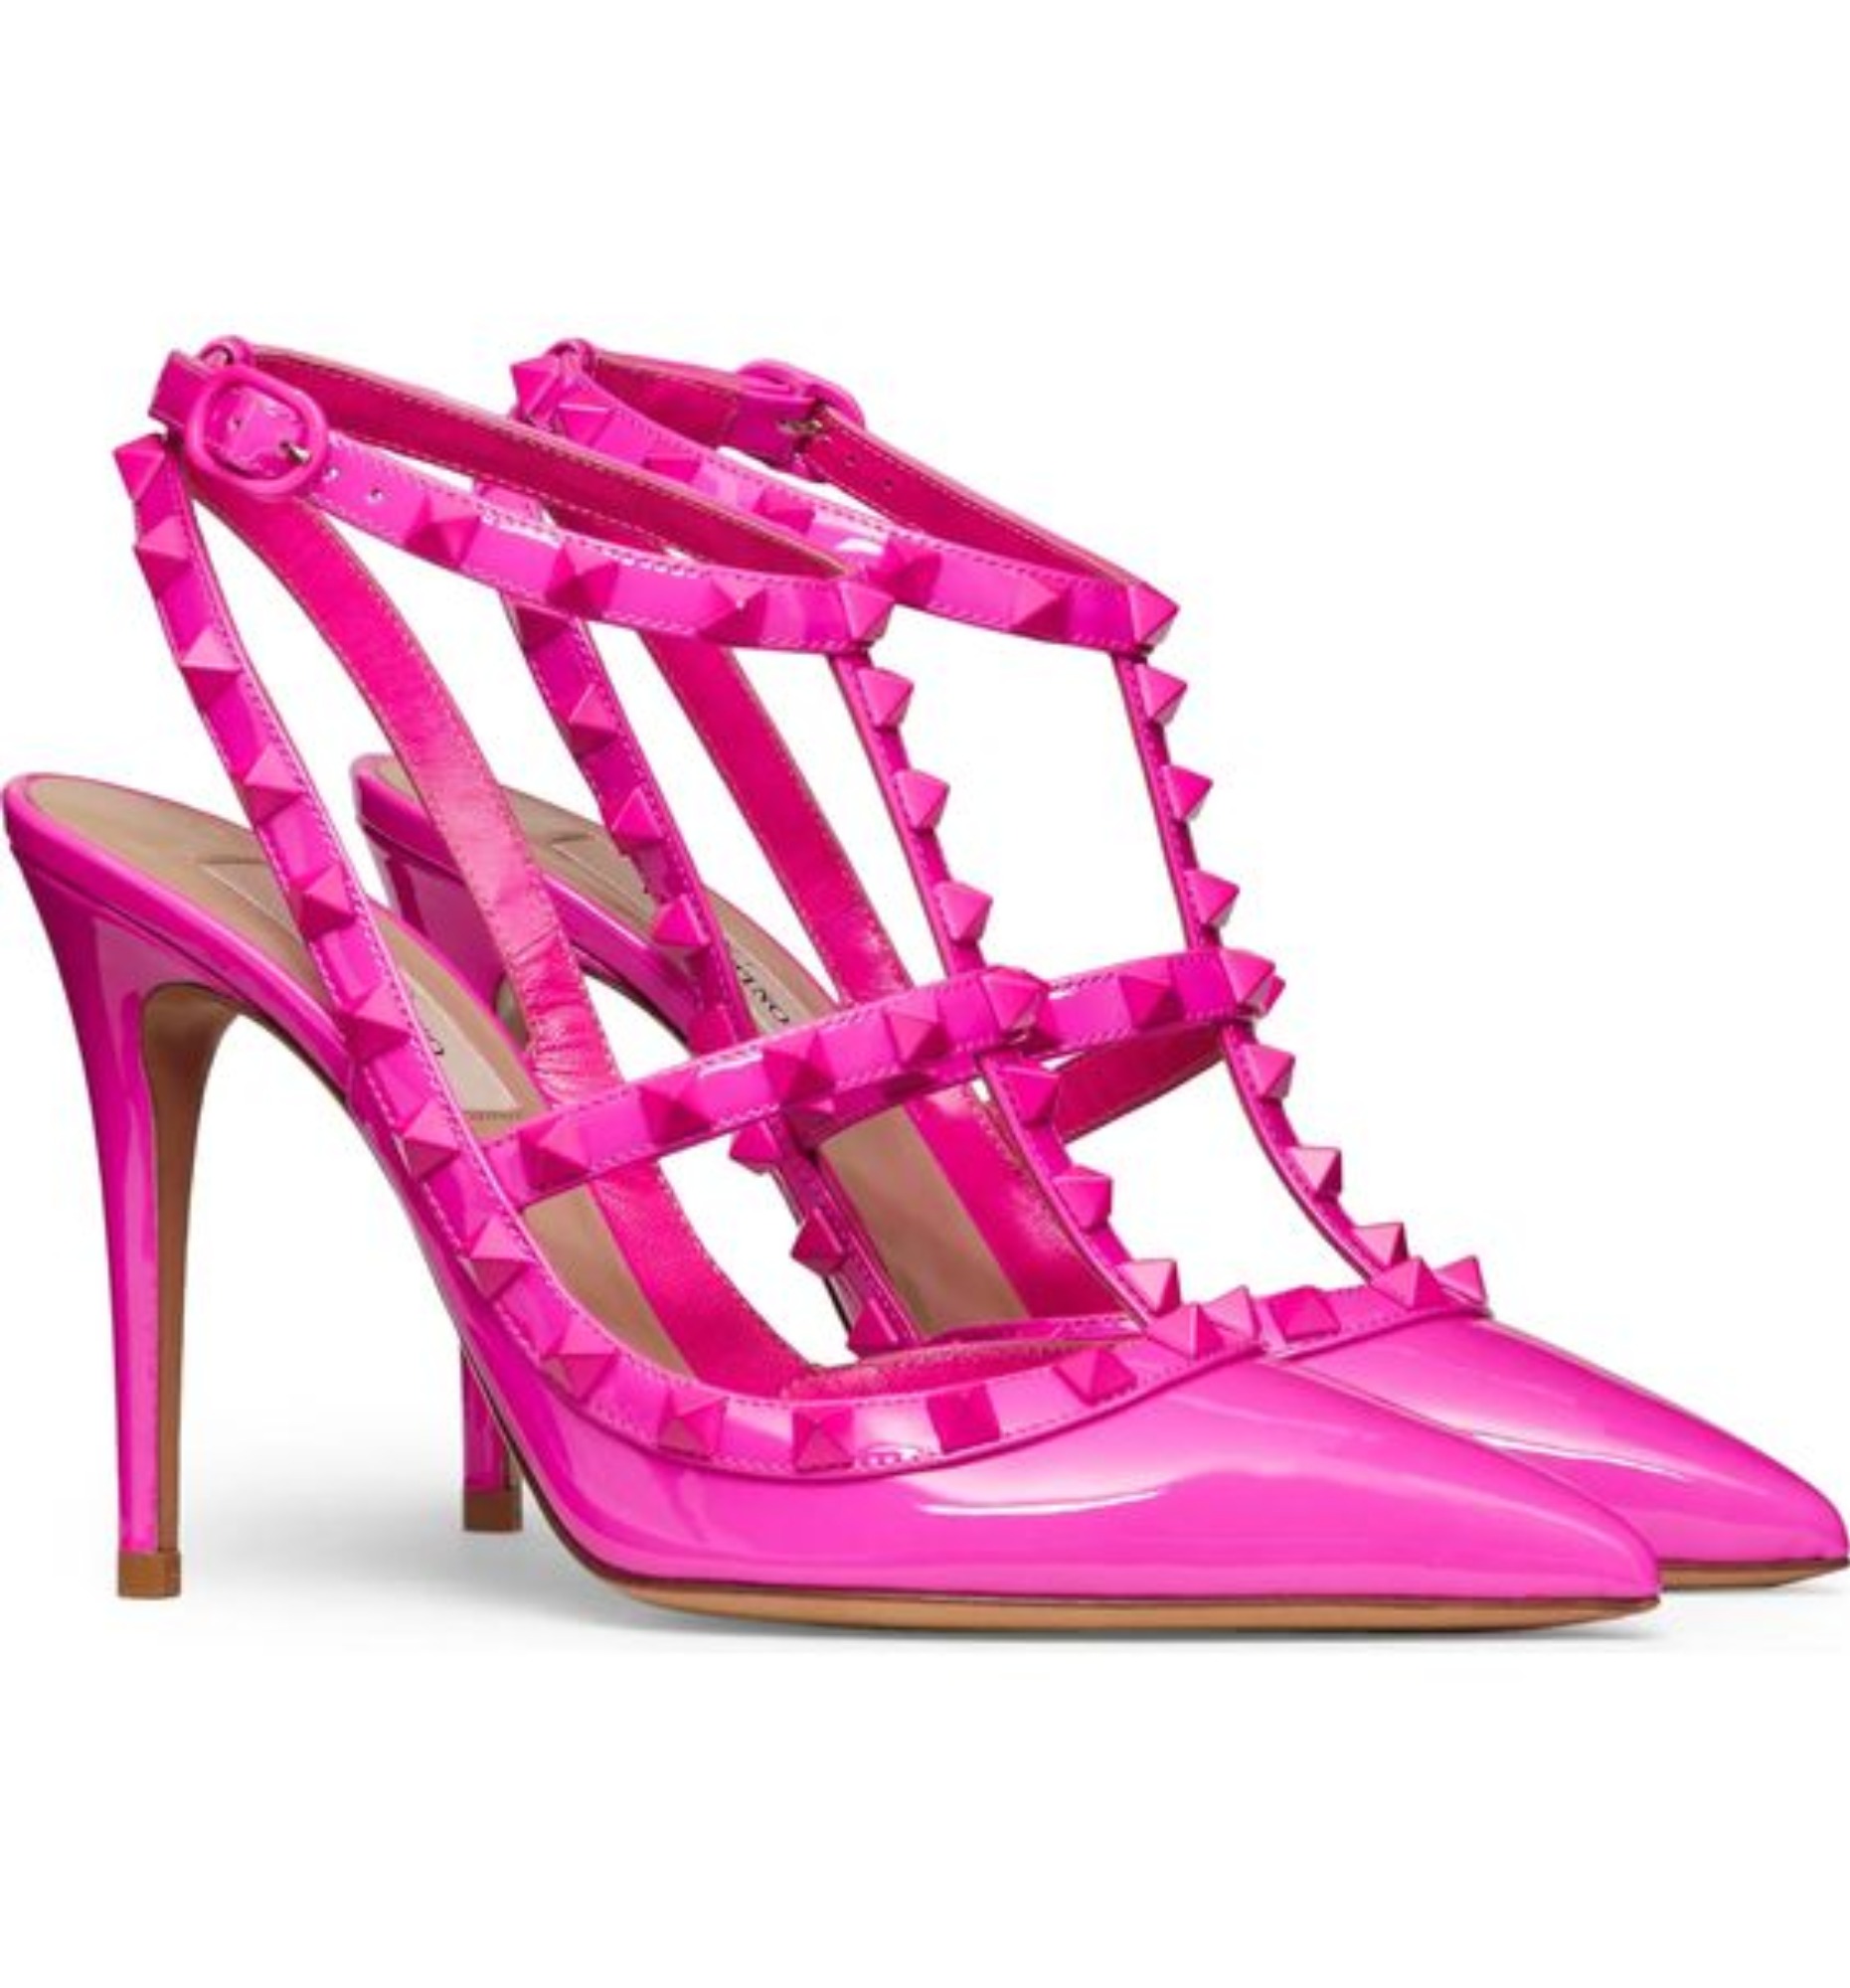 valentino rock stud pumps in hot pink